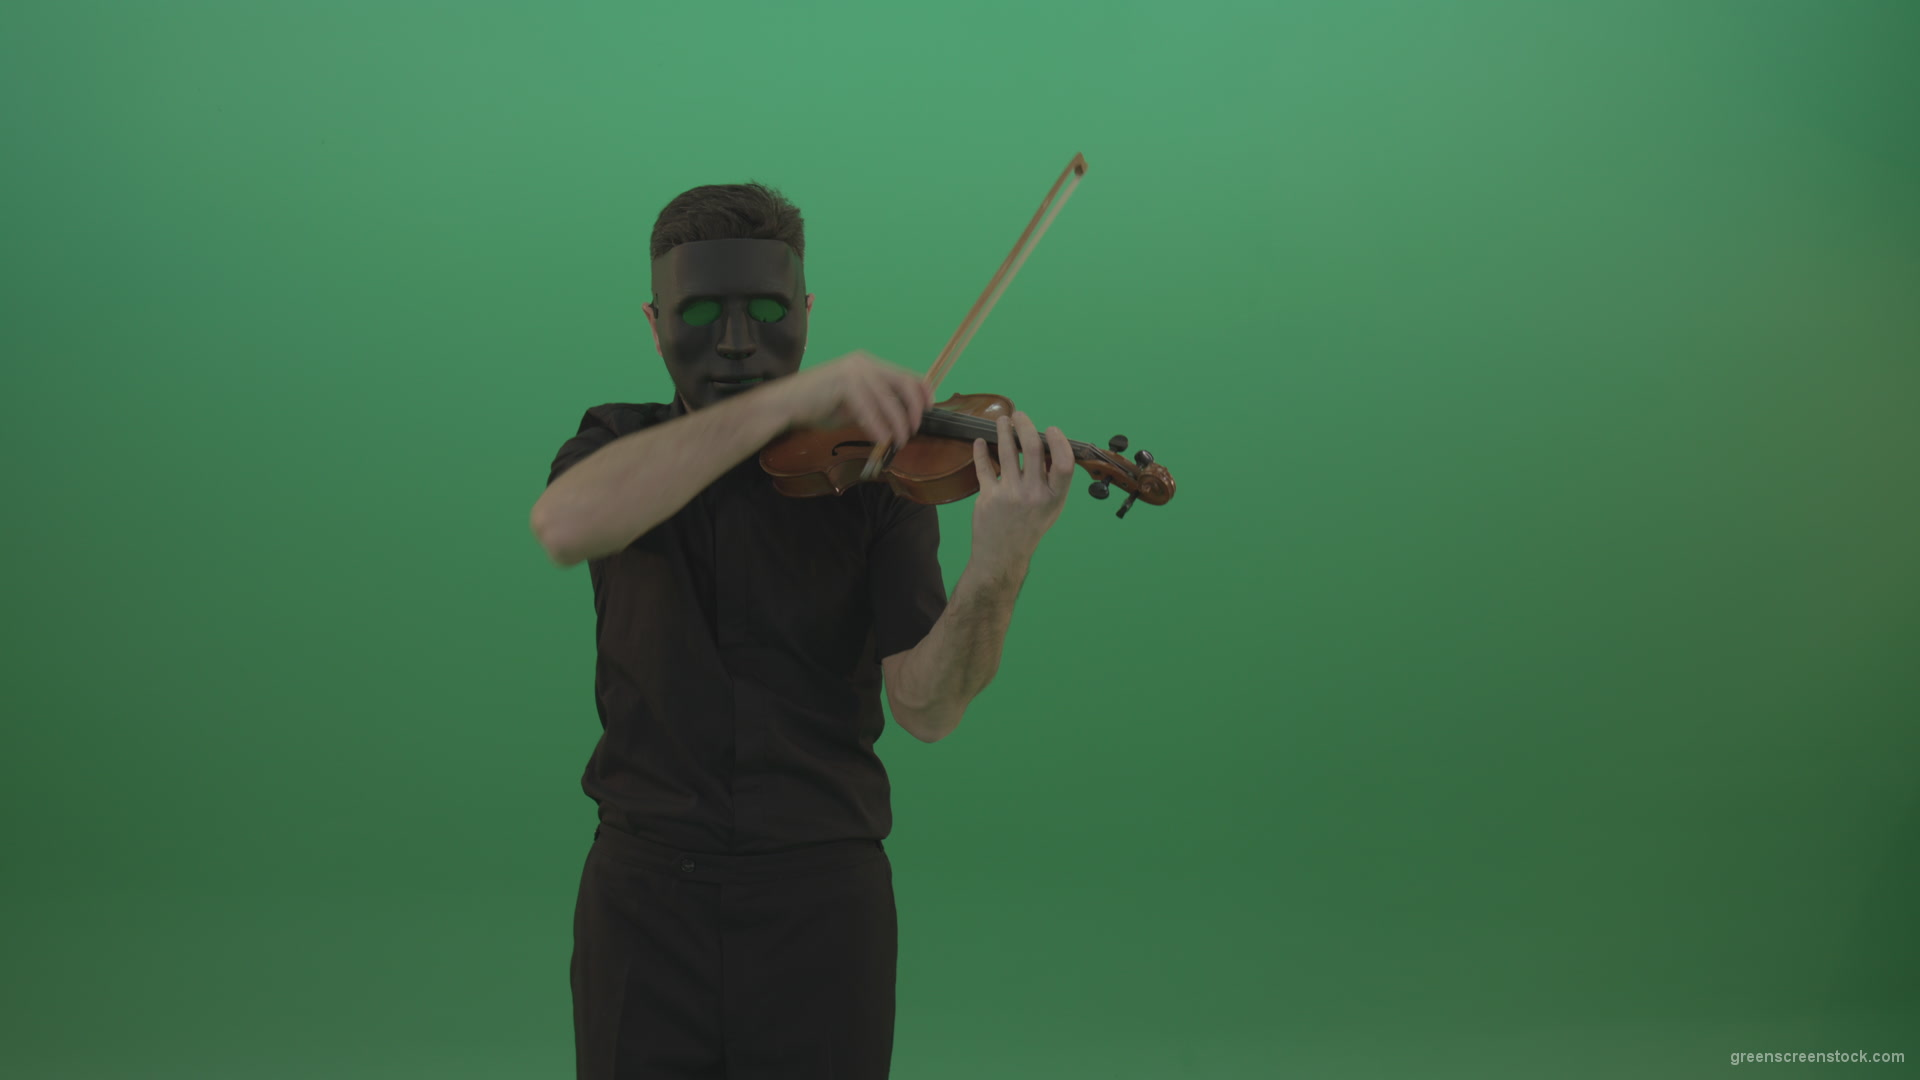 Man-in-black-shirt-and-mask-fast-play-violin-fiddle-strings-gothic-music-isolated-on-green-screen_004 Green Screen Stock